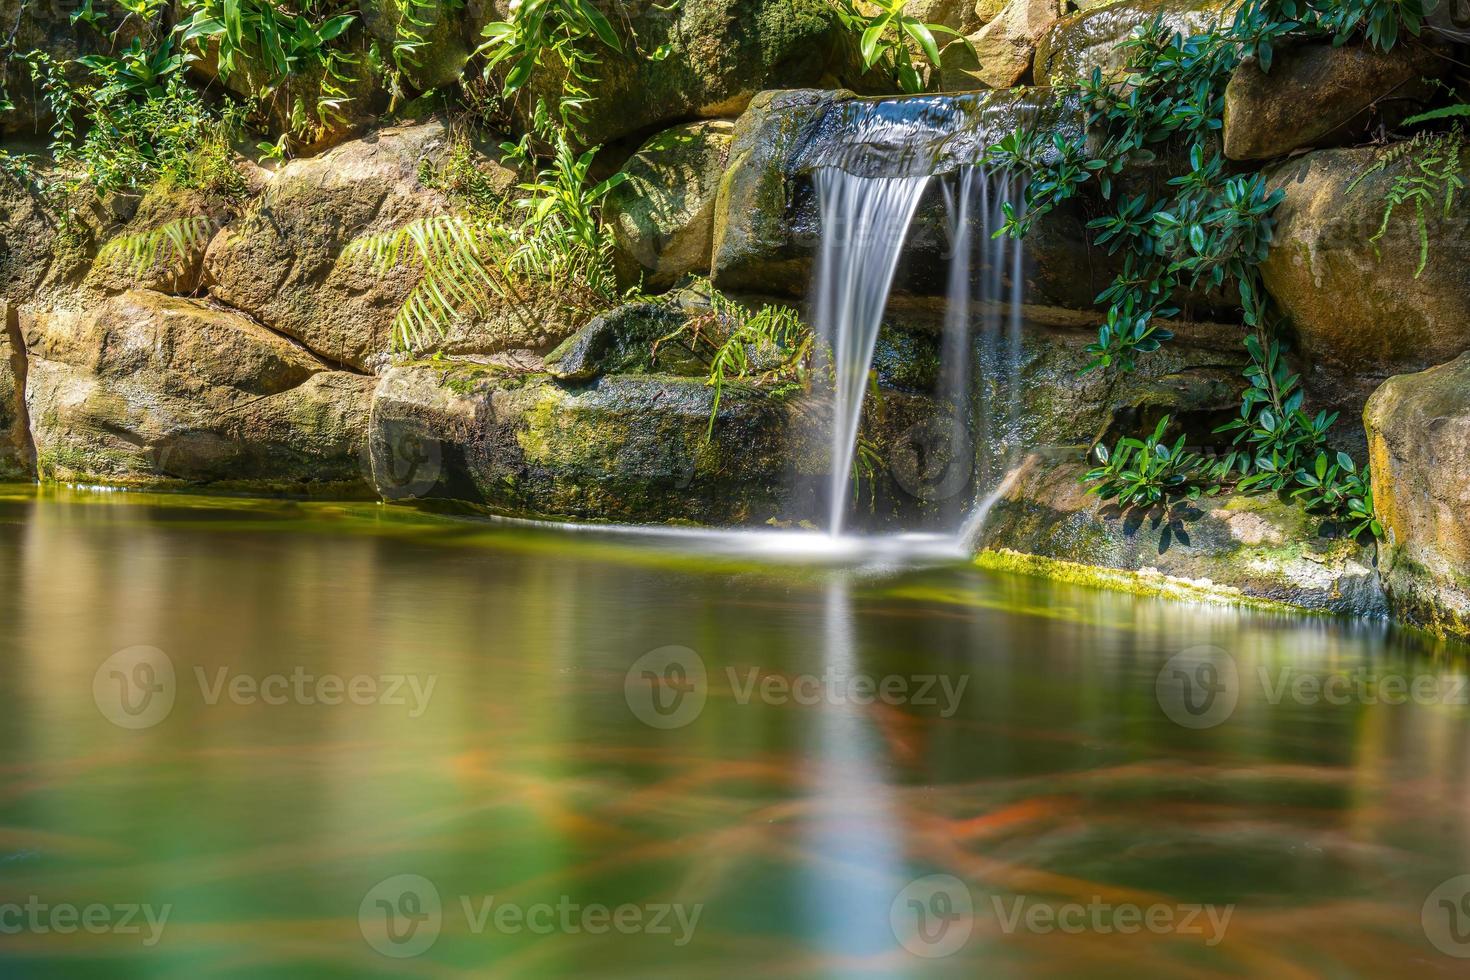 Japanese garden waterfalls. Lush green tropical Koi pond with waterfall from each side. A lush green garden with waterfall cascading down the rocky stones. Zen and peaceful background. photo